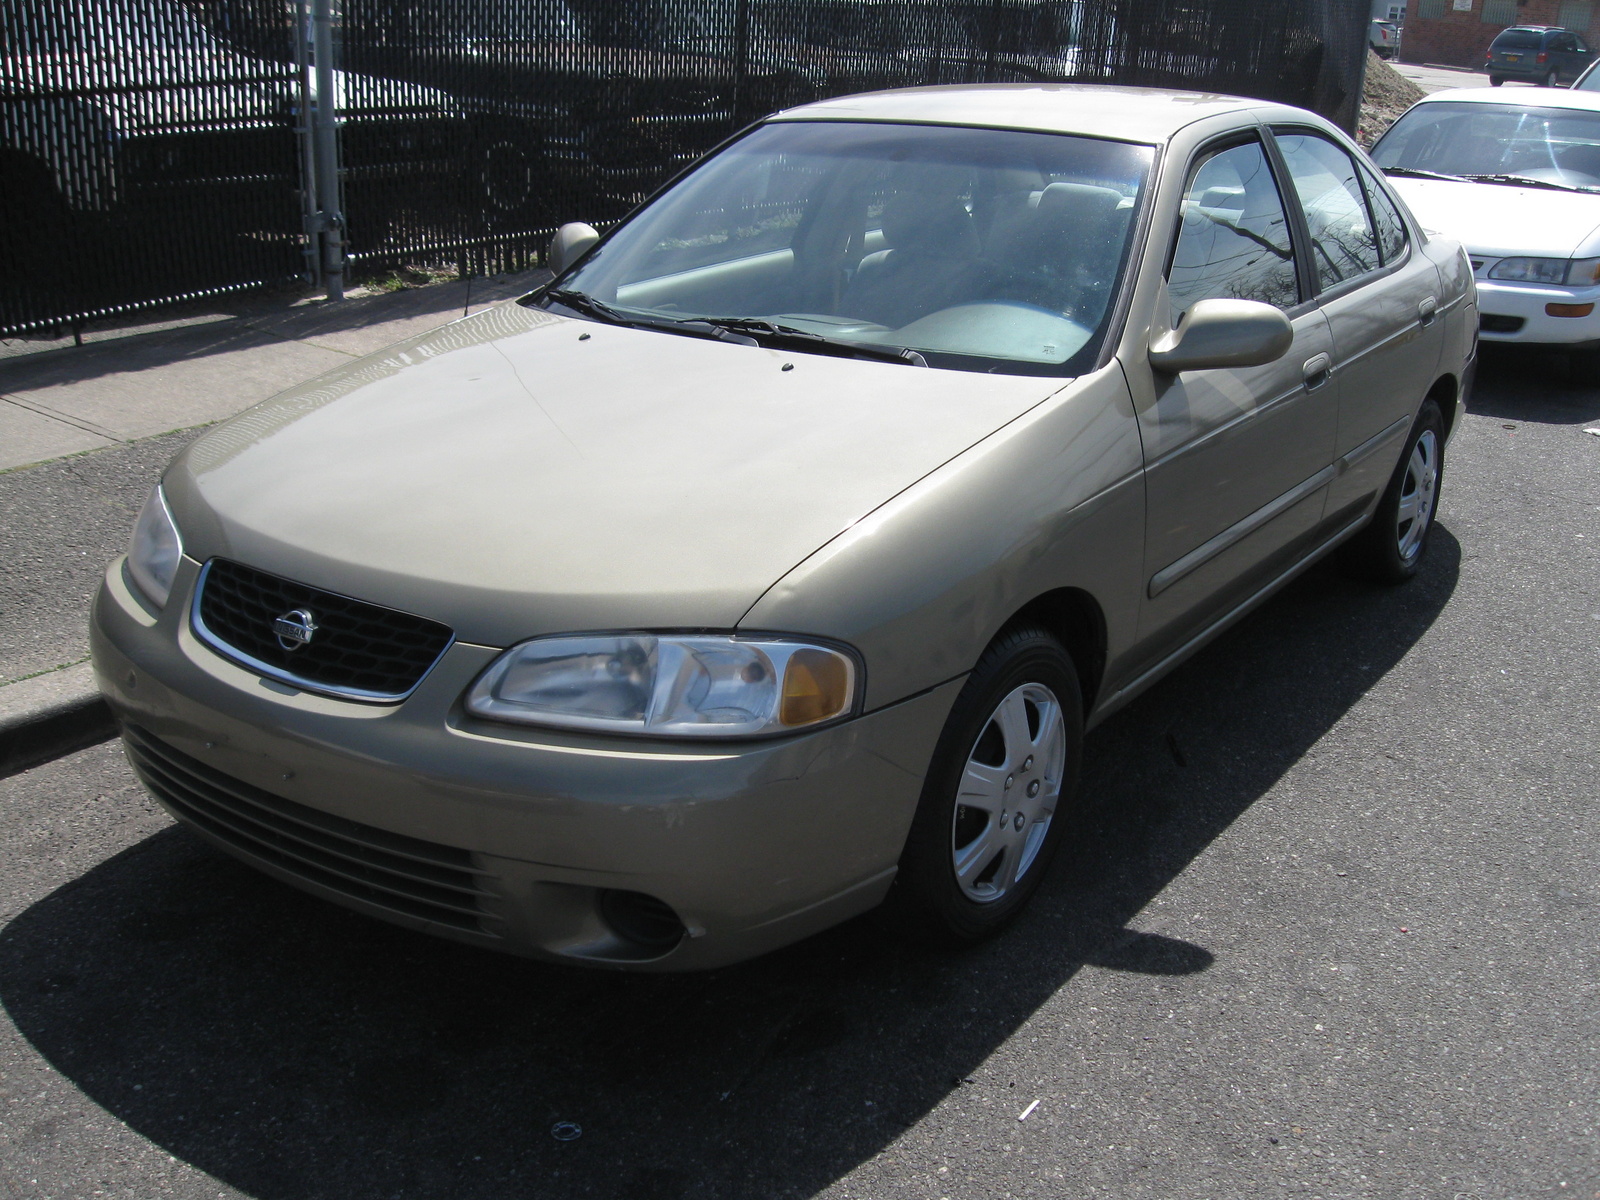 Used 2001 nissan sentra gxe review #6